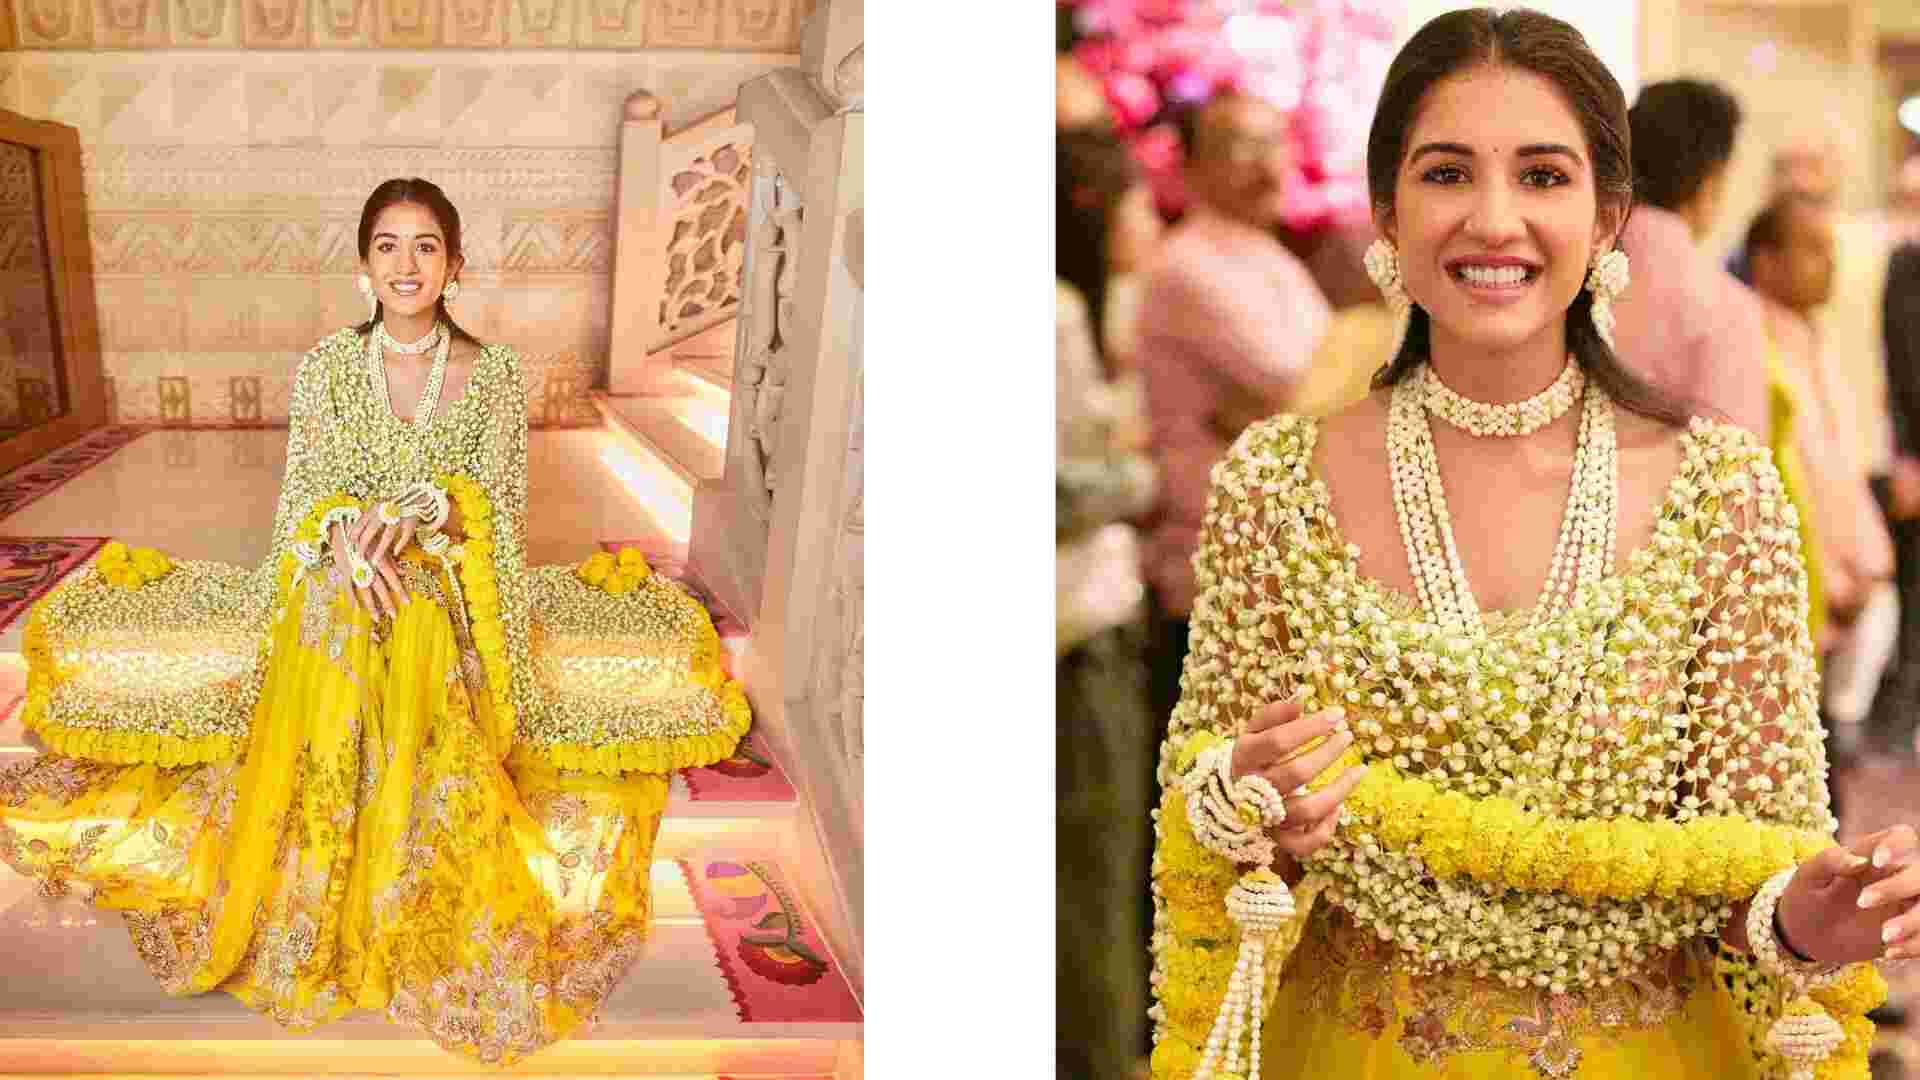 Radhika Merchant’s Haldi Outfit Steals The Show With Stunning Dupatta Made Of Flowers. See Pics